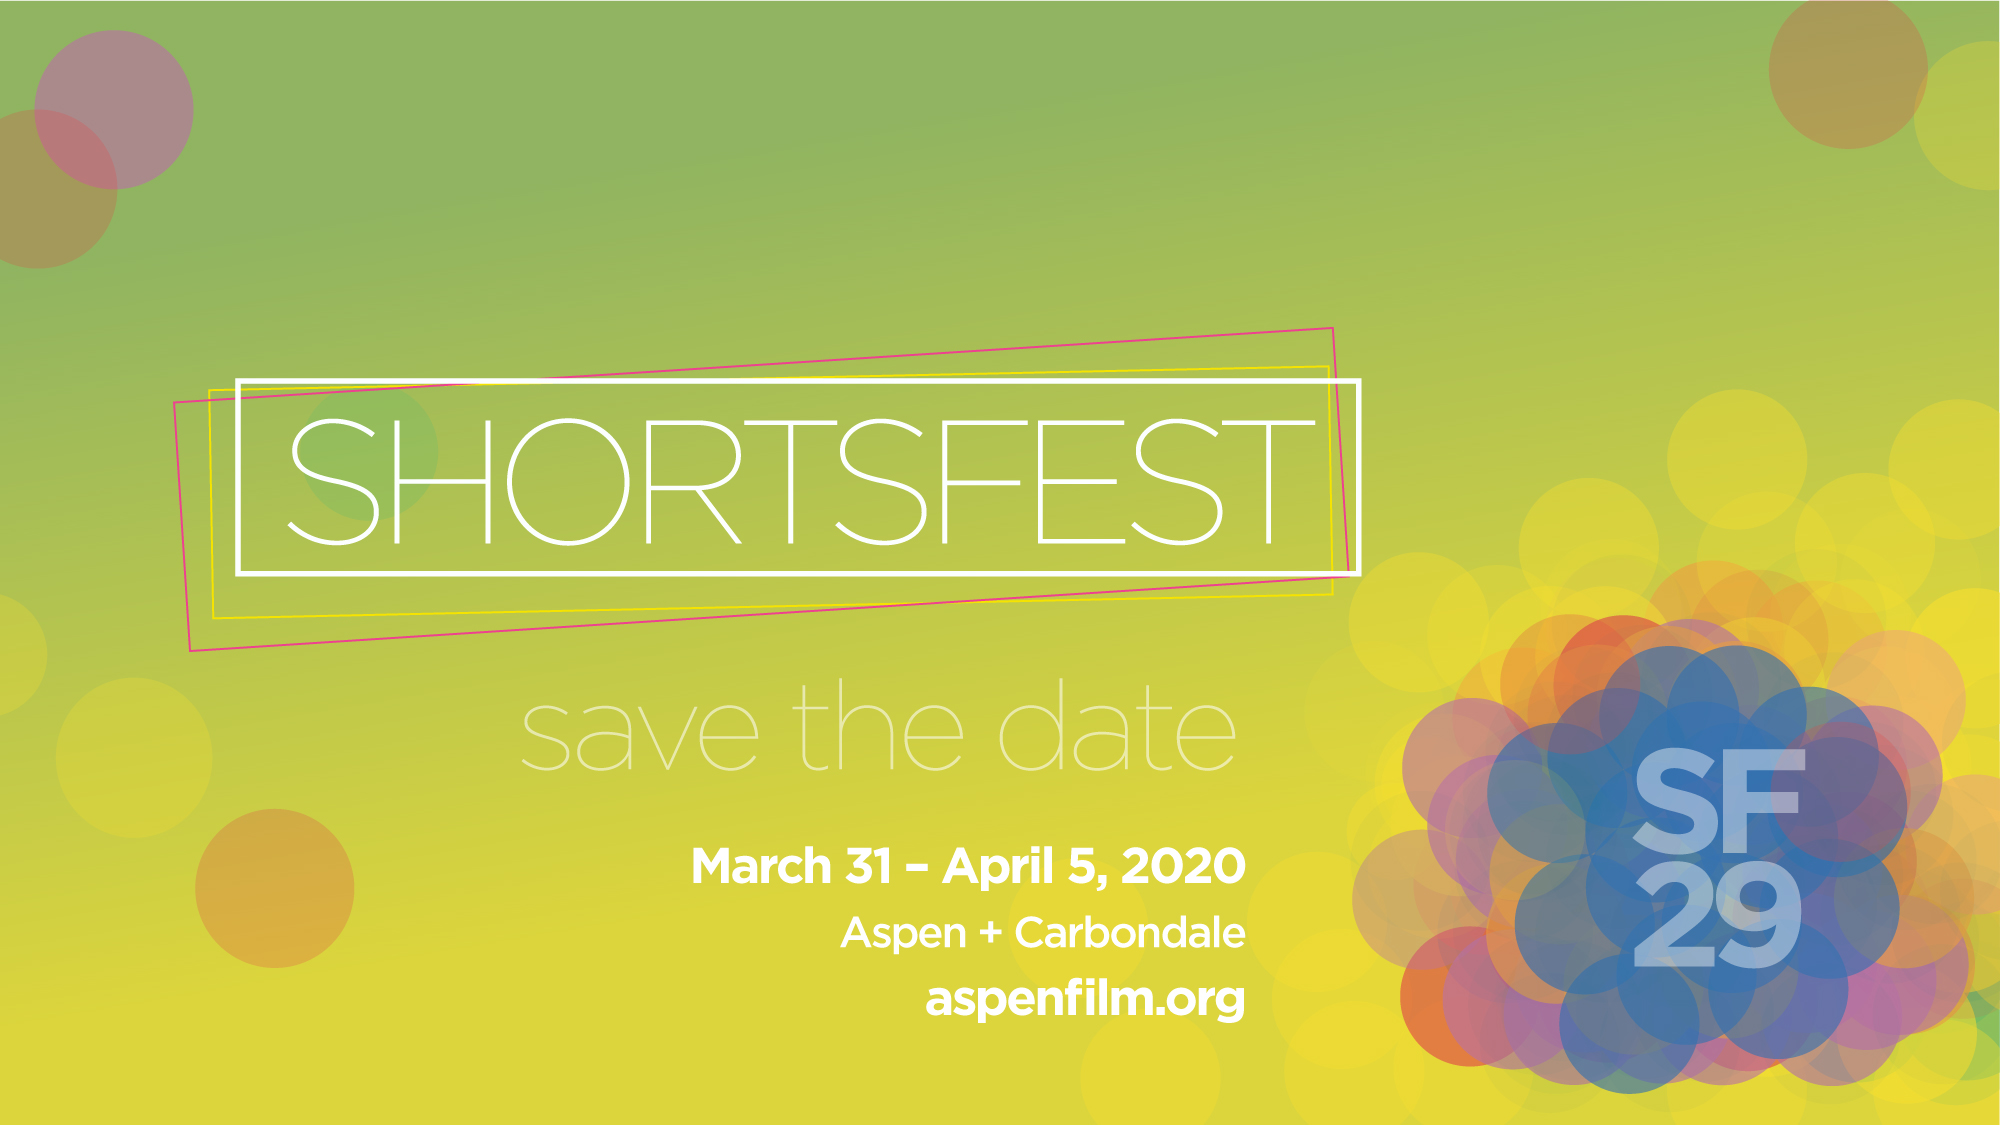 ASPEN FILM NOW ACCEPTING SUBMISSIONS FOR ITS 2020 ANNUAL OSCAR®-QUALIFYING SHORTSFEST